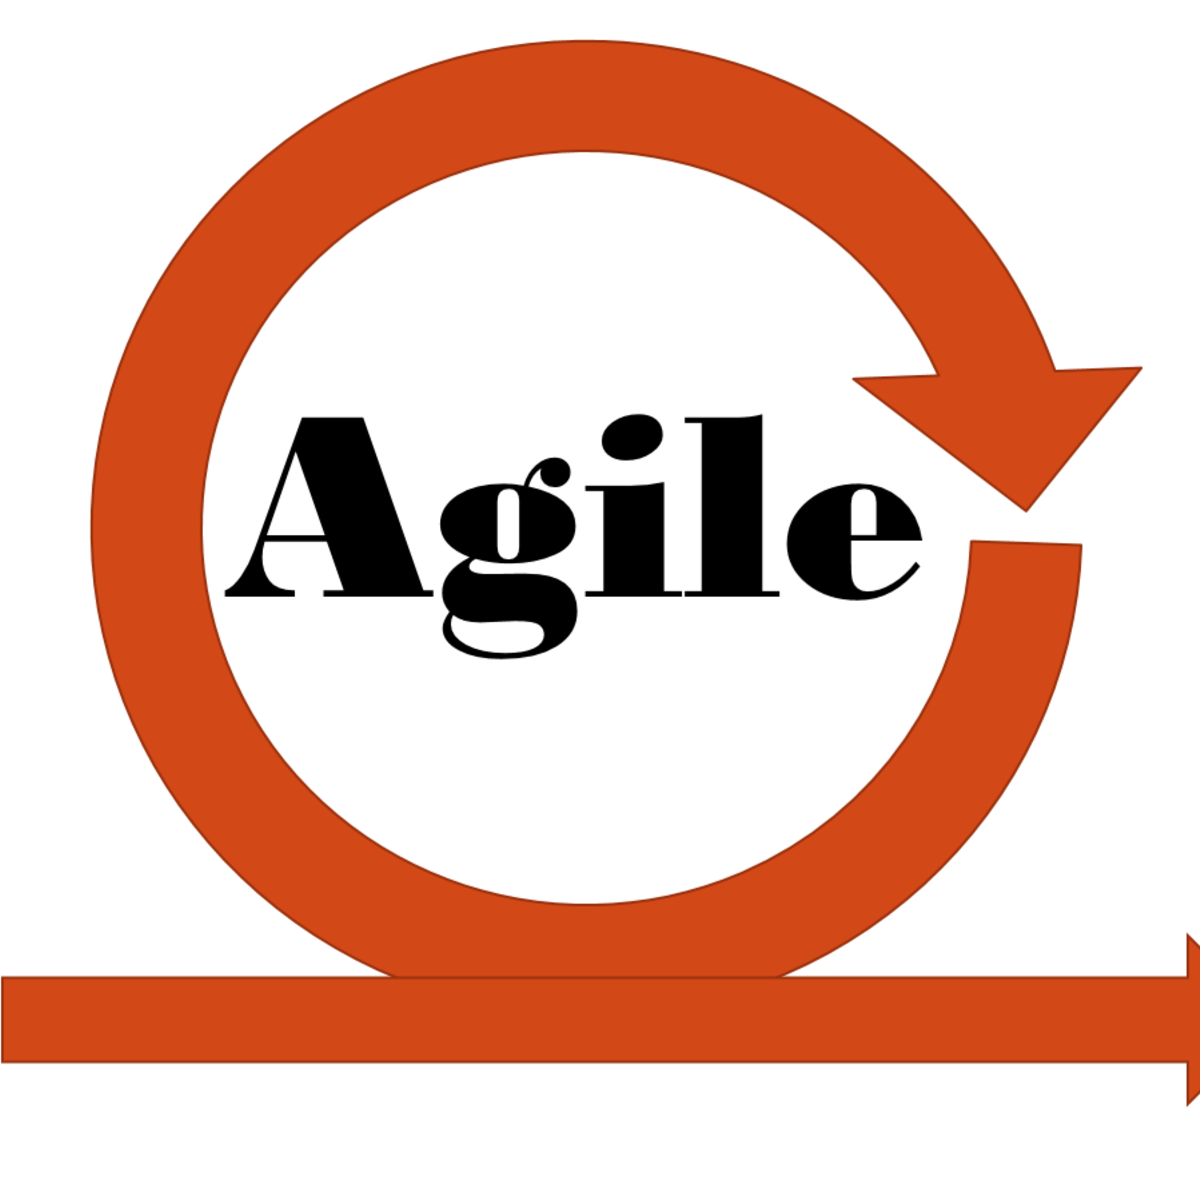 11 Good Learning Resources for Agile Certification